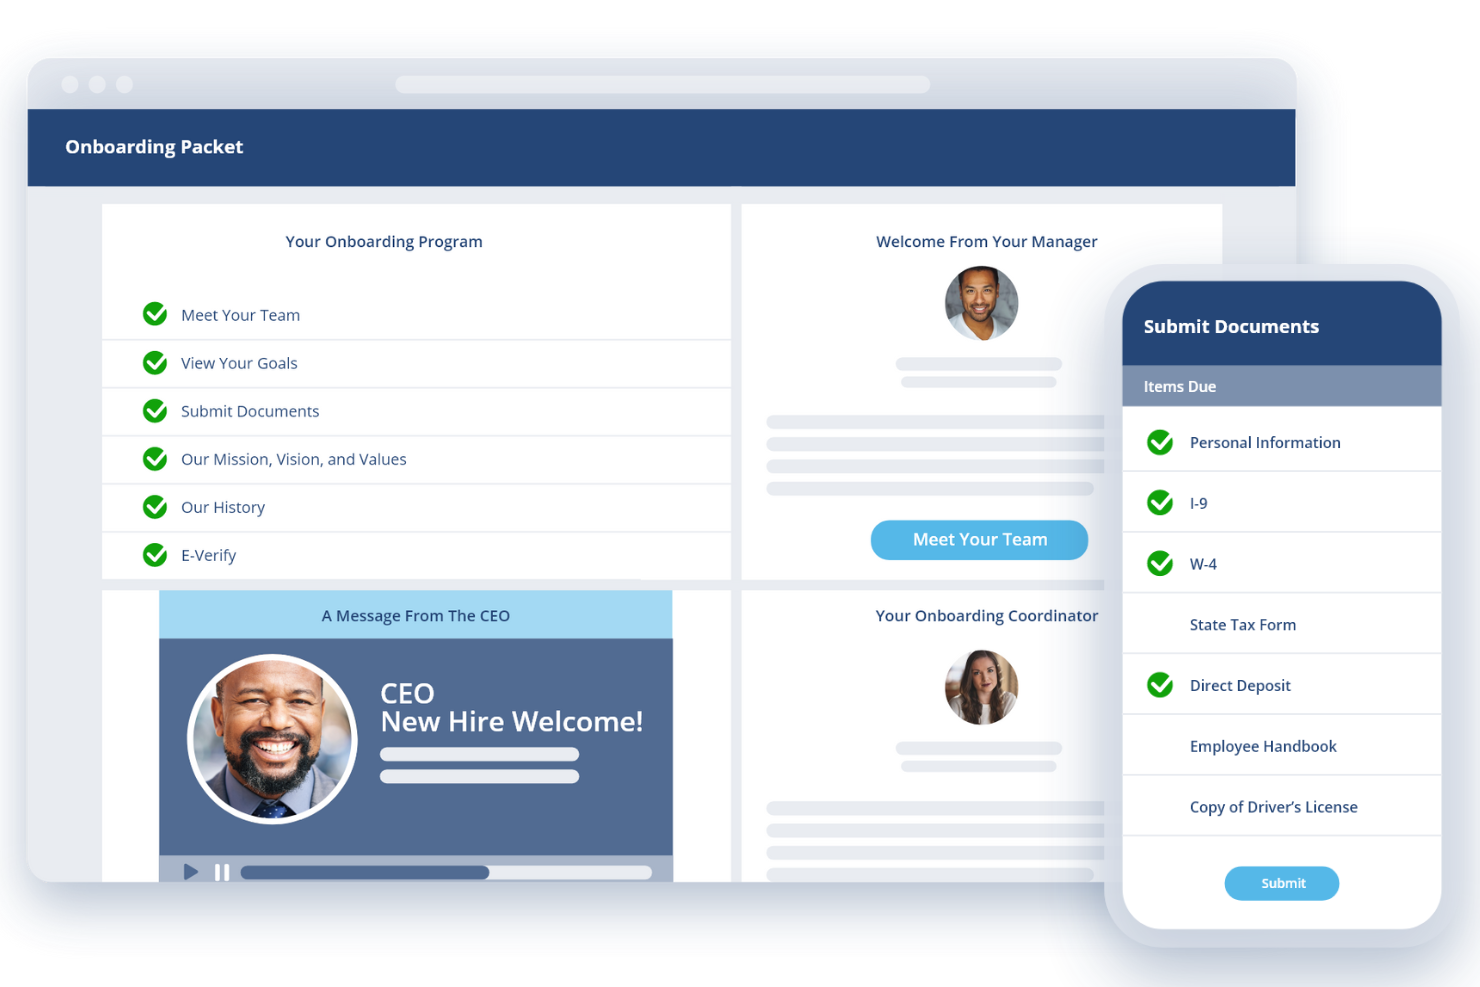 Create a smooth onboarding experience for your new employees and make it easy for your hiring managers, HR, and IT to ensure compliance and complete all internal new hire setup tasks.